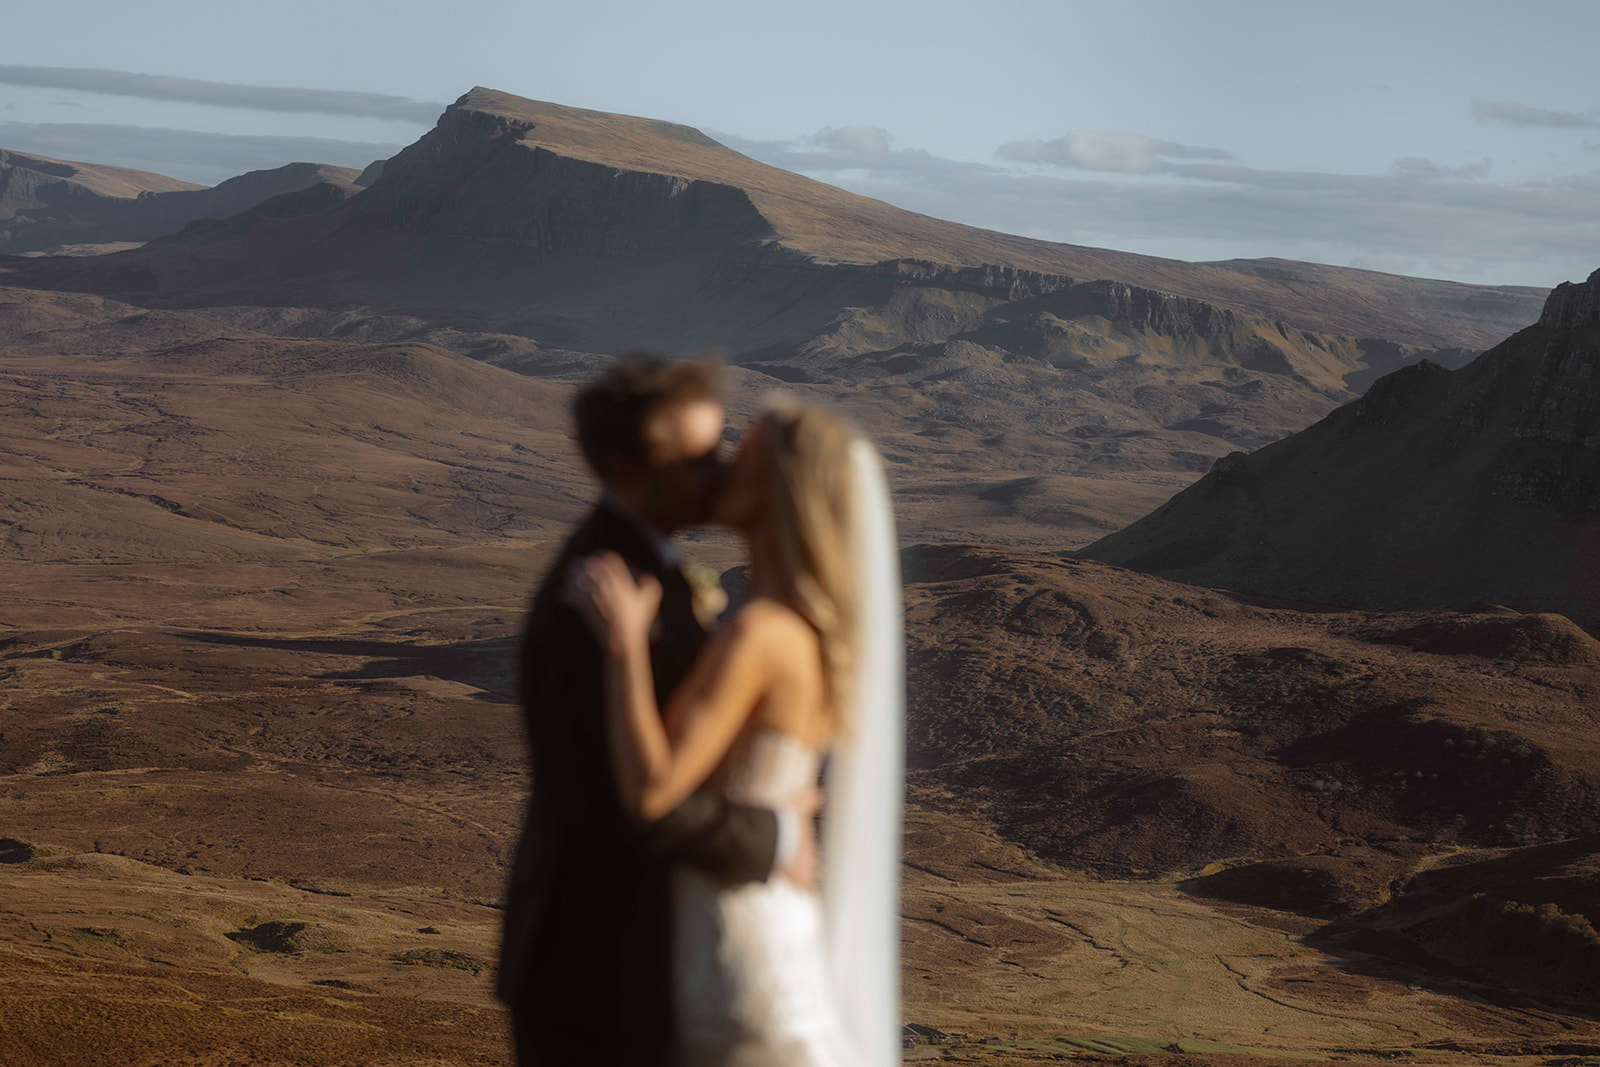 Kara and Andy's Isle of Skye elopement ceremony was a beautiful and intimate affair.